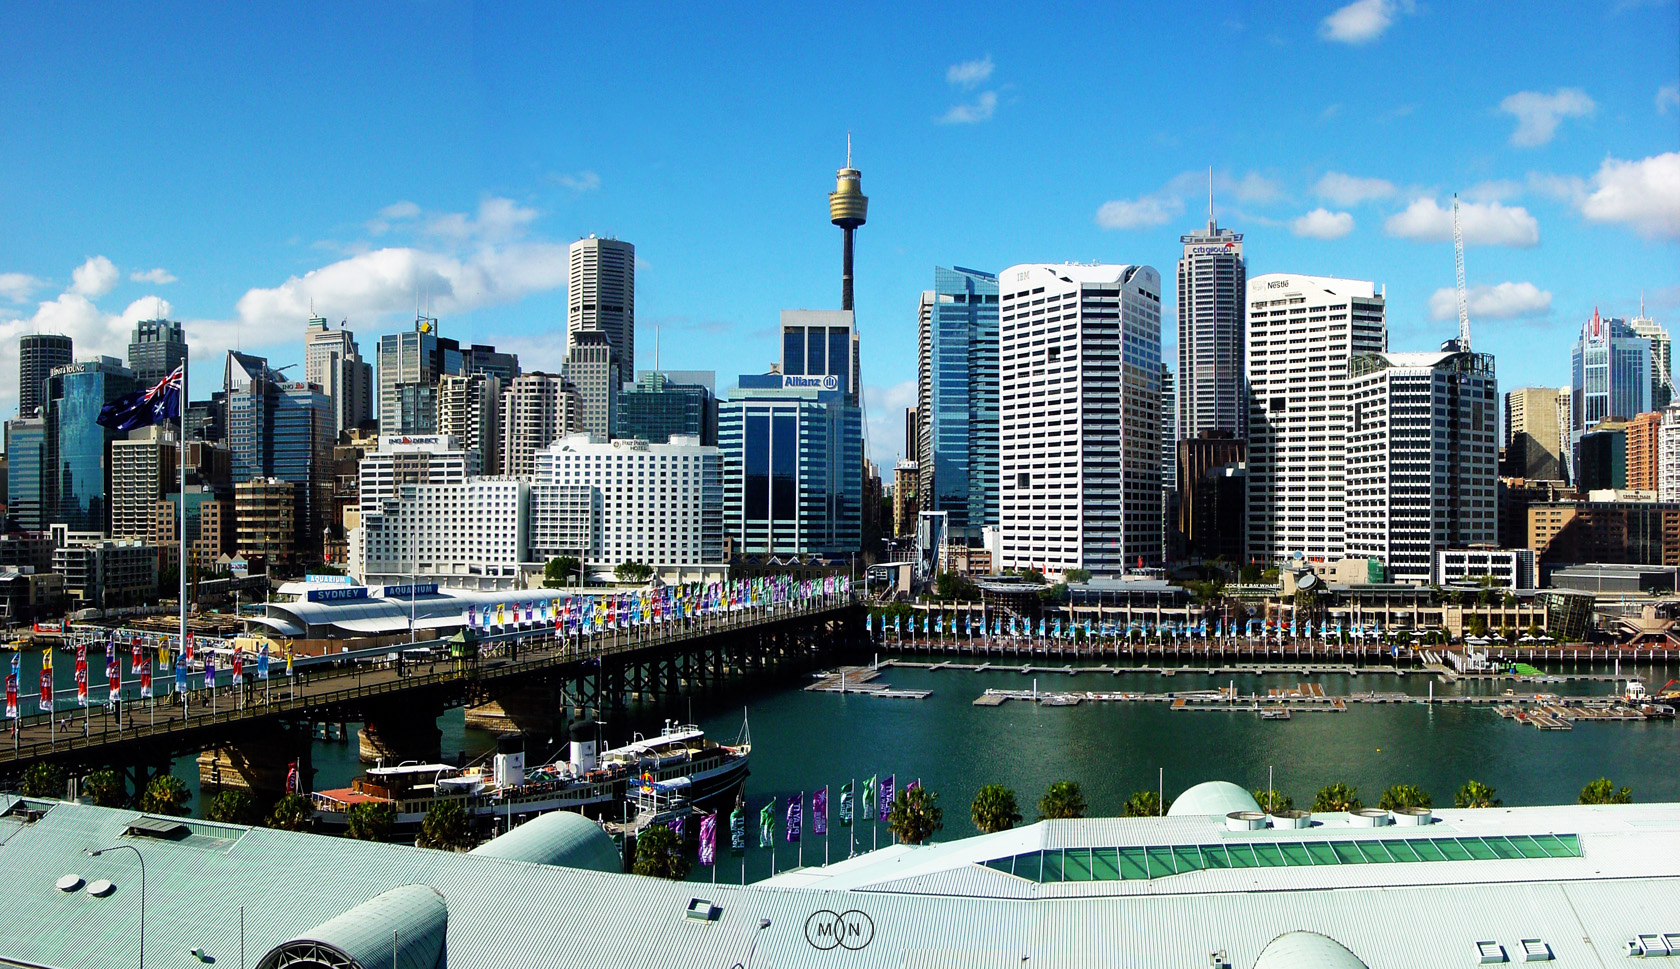 Retro Darling Harbour: Midday